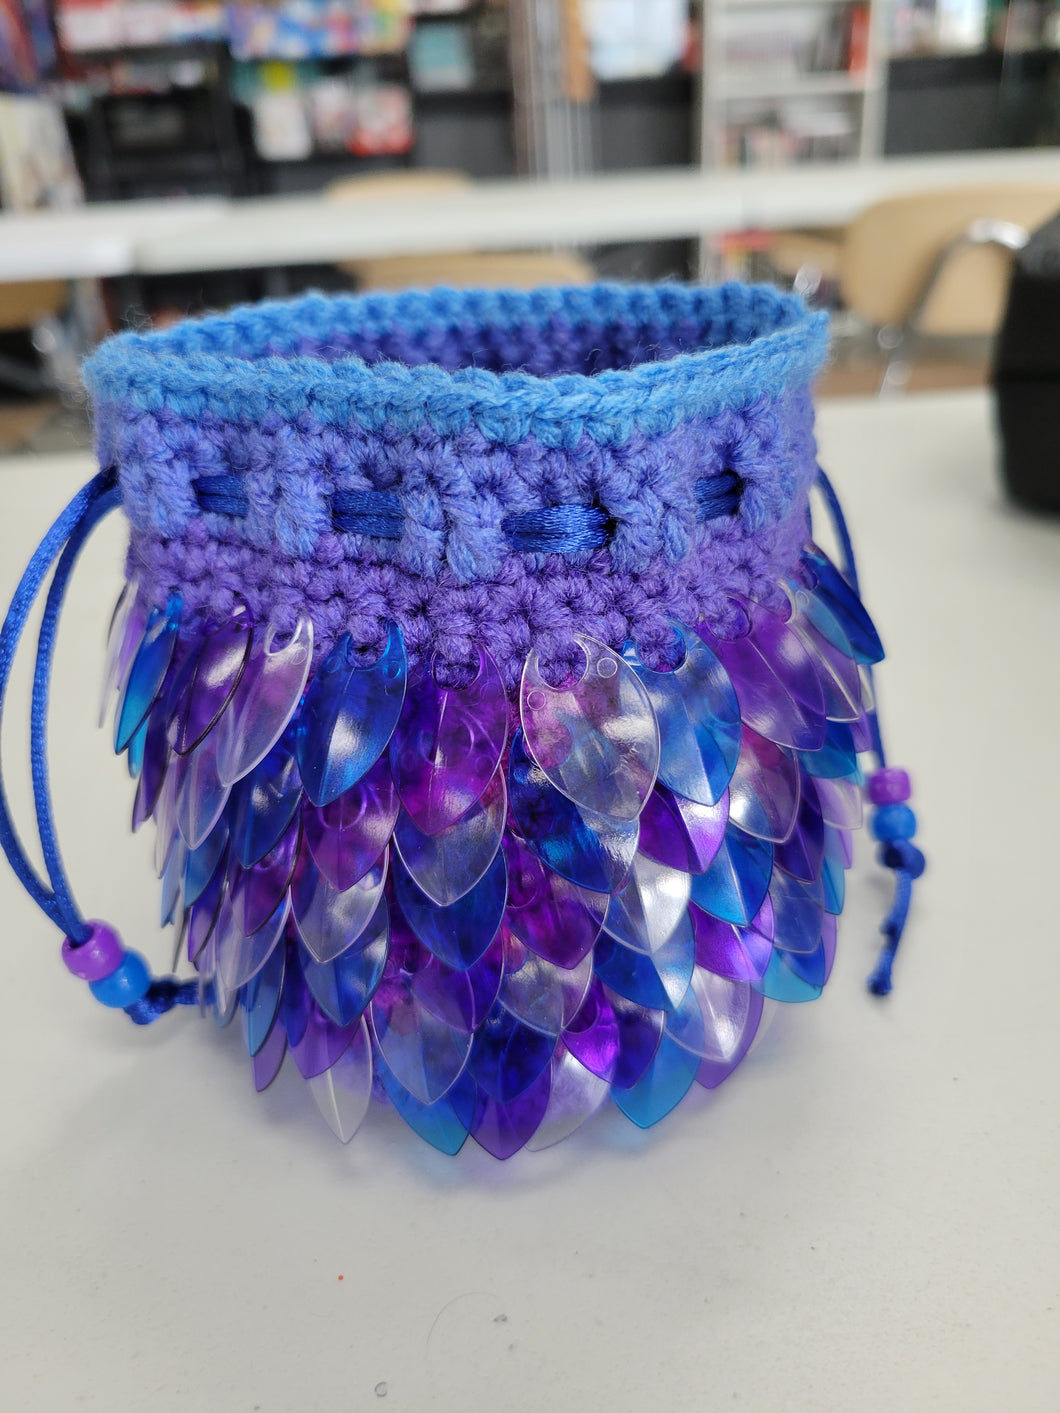 Dragon Scale Dice Bag - Purple, Blue, and Clear Plastic Scales